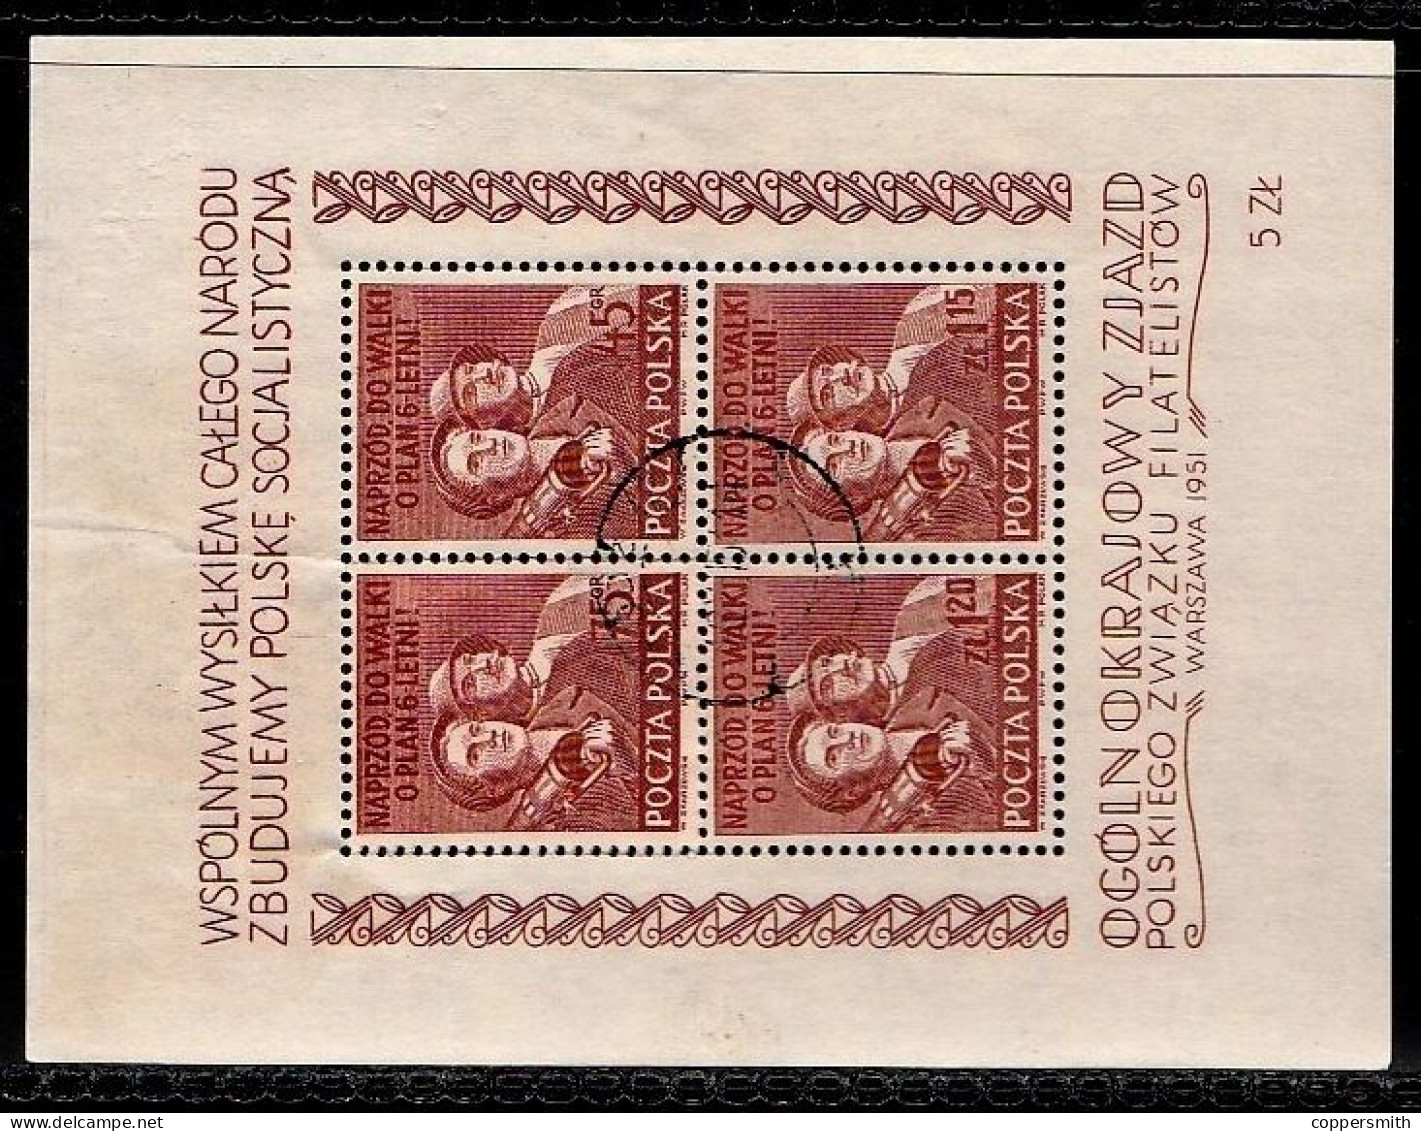 (039) Poland / Pologne / Polen  1951 / Philatelic Congress Sheet / Bf / Bloc  Used / Oblit* / See Scan  Michel BL 12 - Nuevos